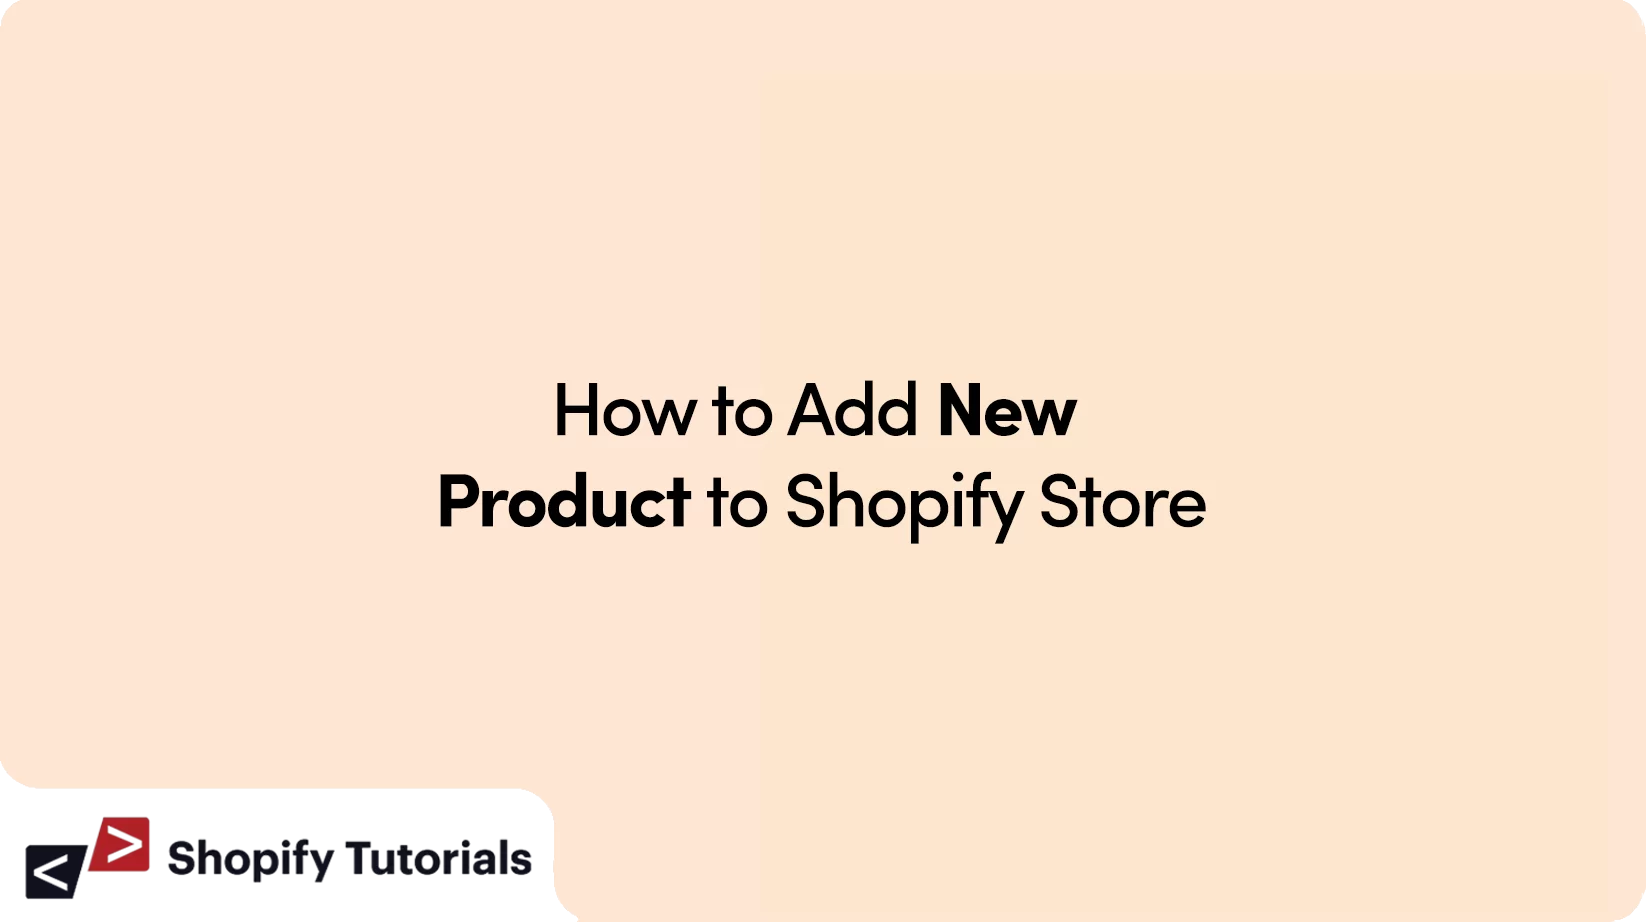 How to Add New Product to Shopify Store